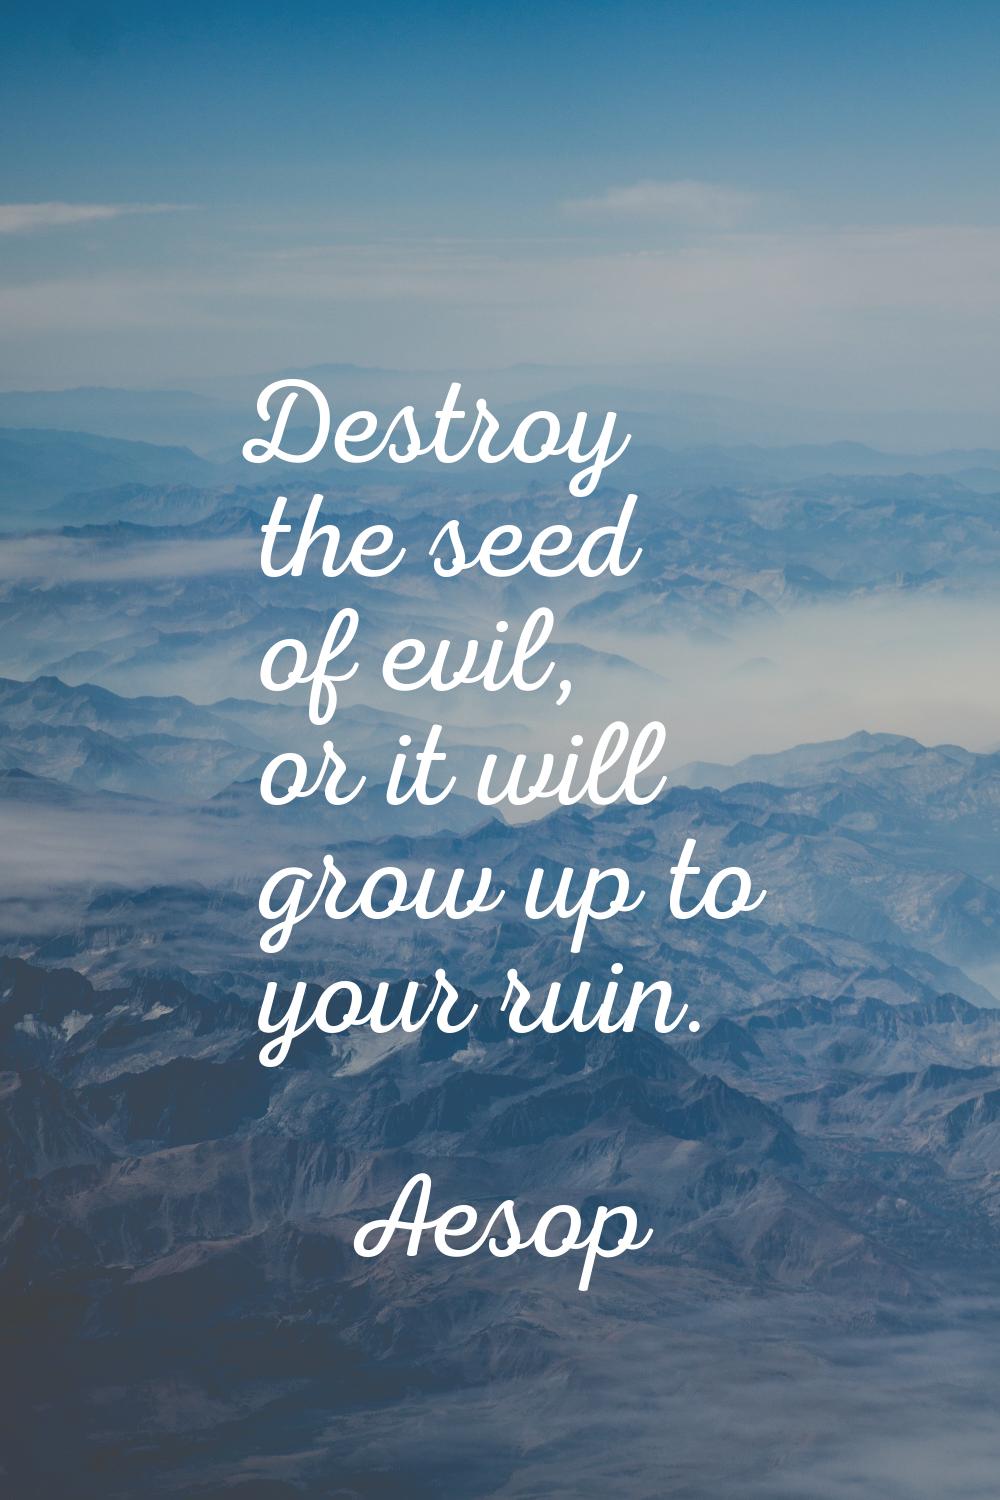 Destroy the seed of evil, or it will grow up to your ruin.